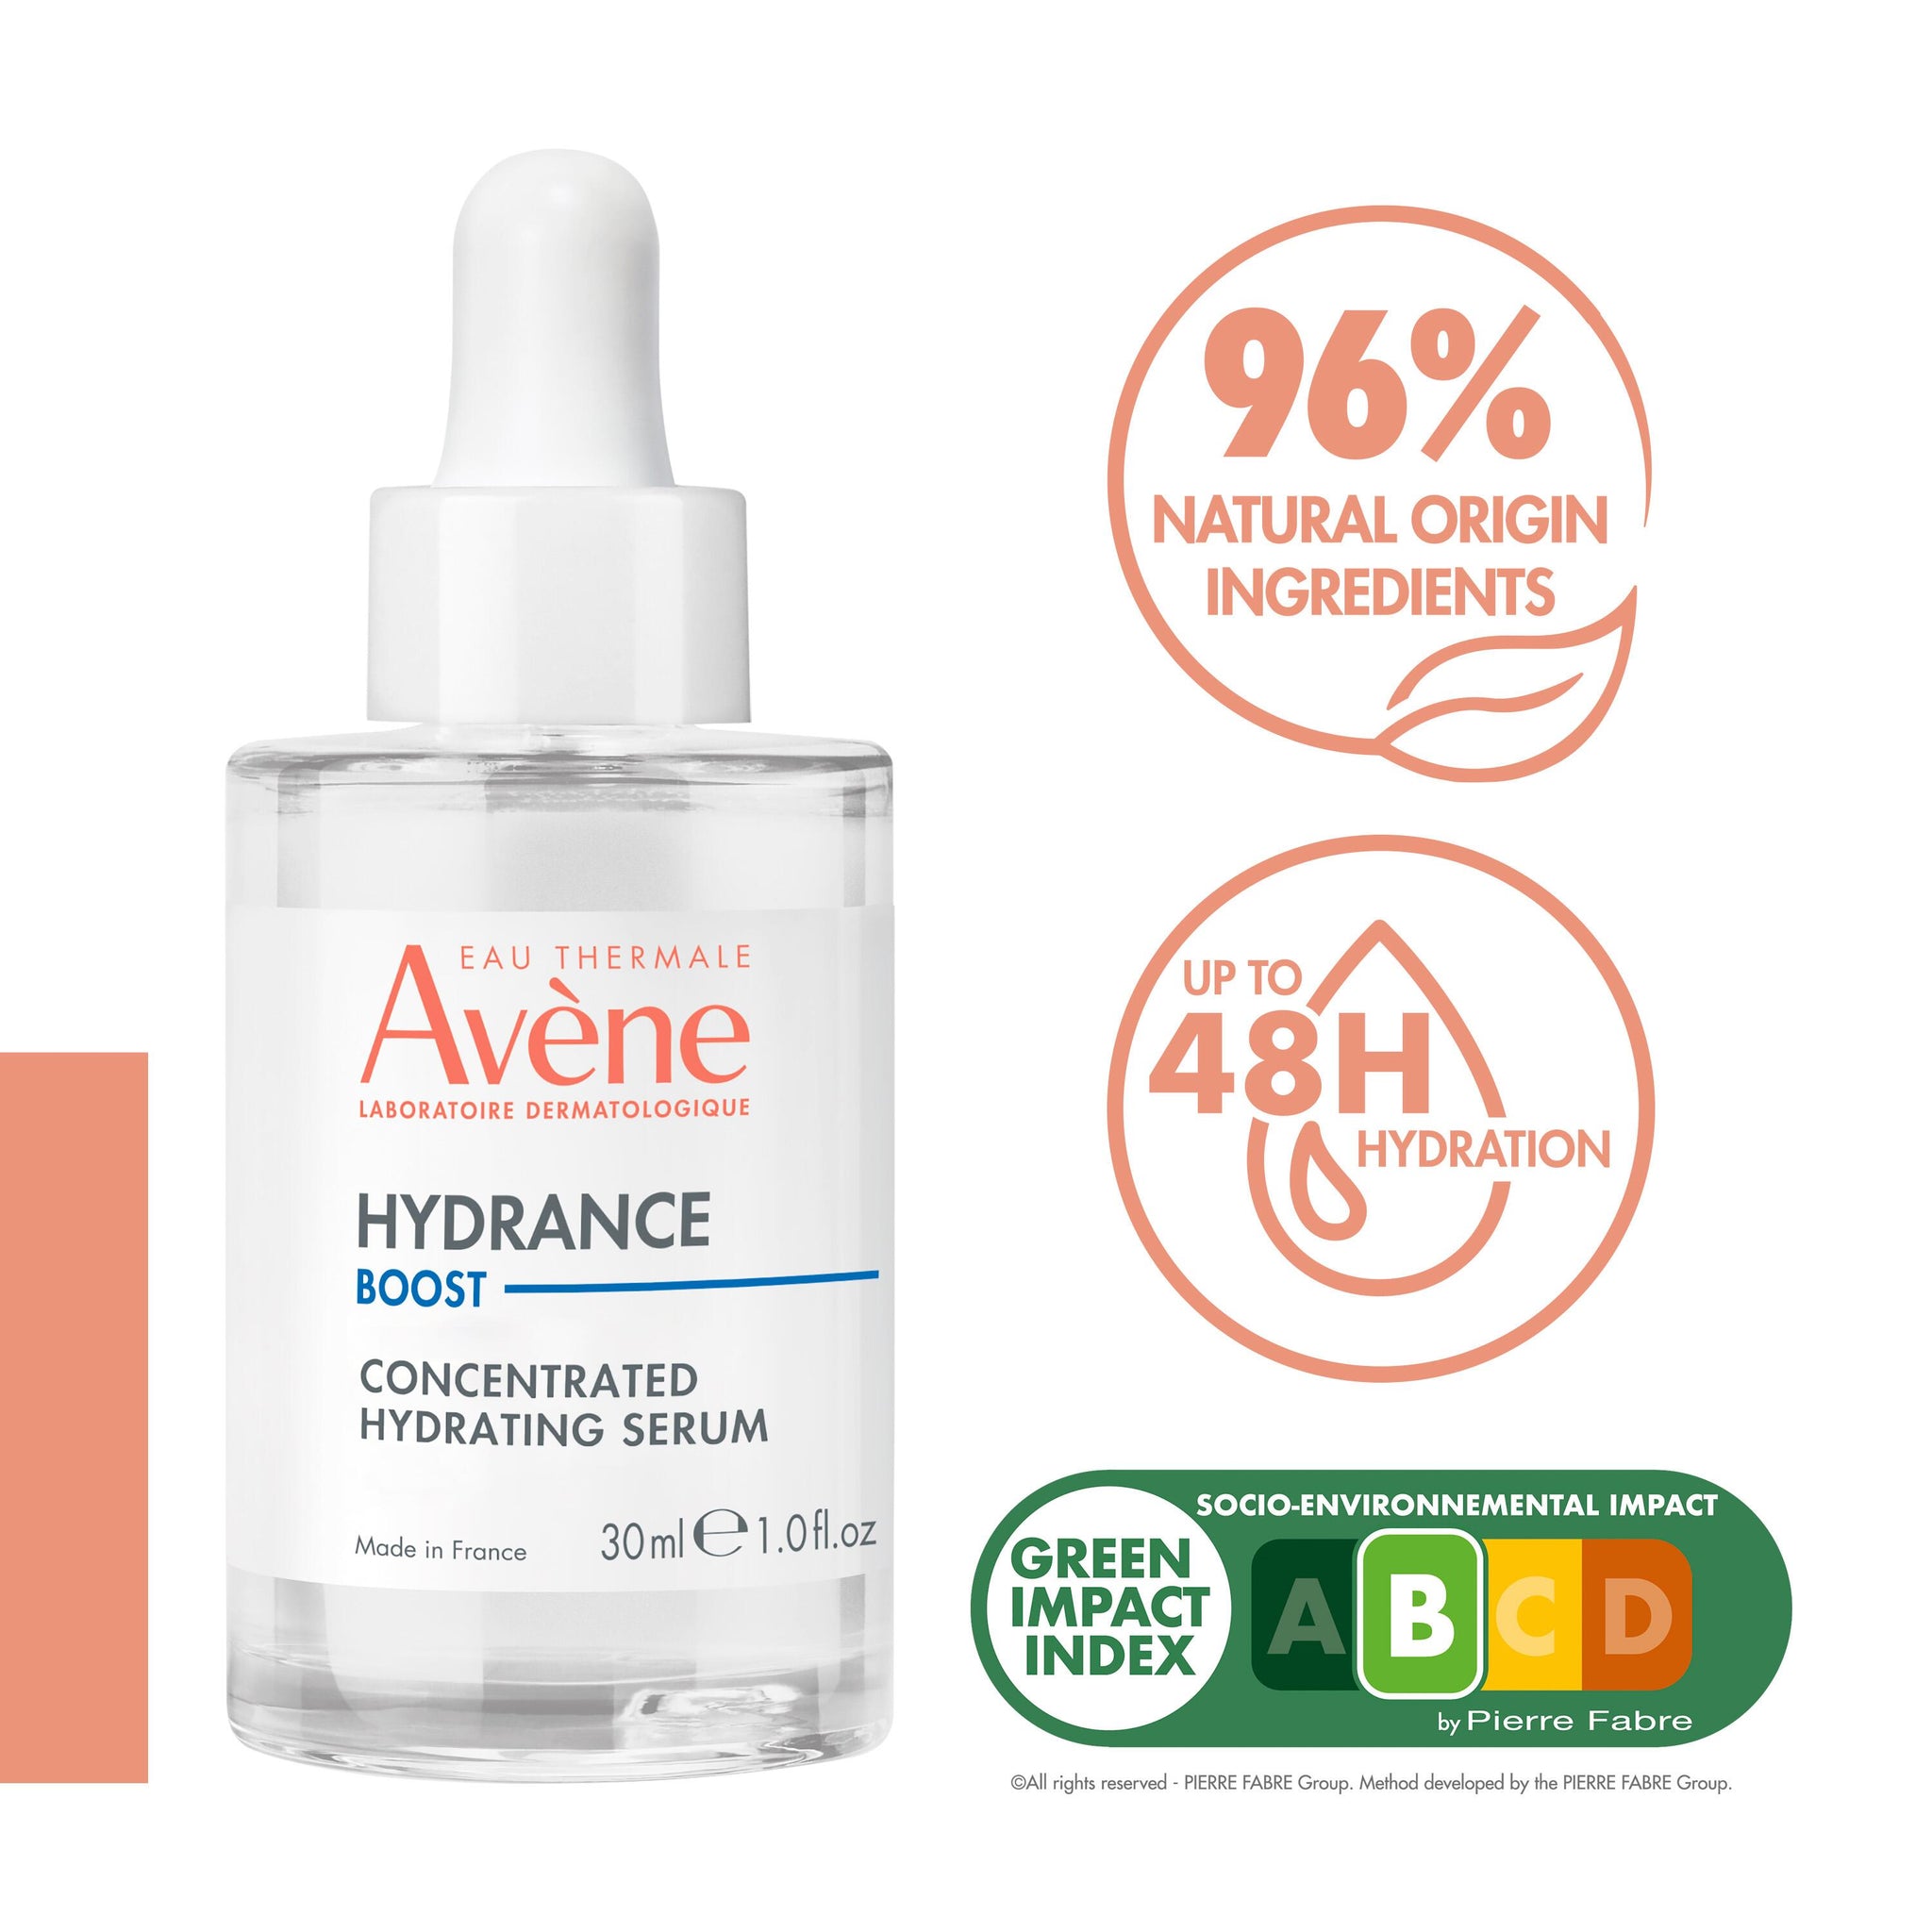 Avene Hydrance Boost Concentrated Hydrating Serum Review - Escentual's Blog